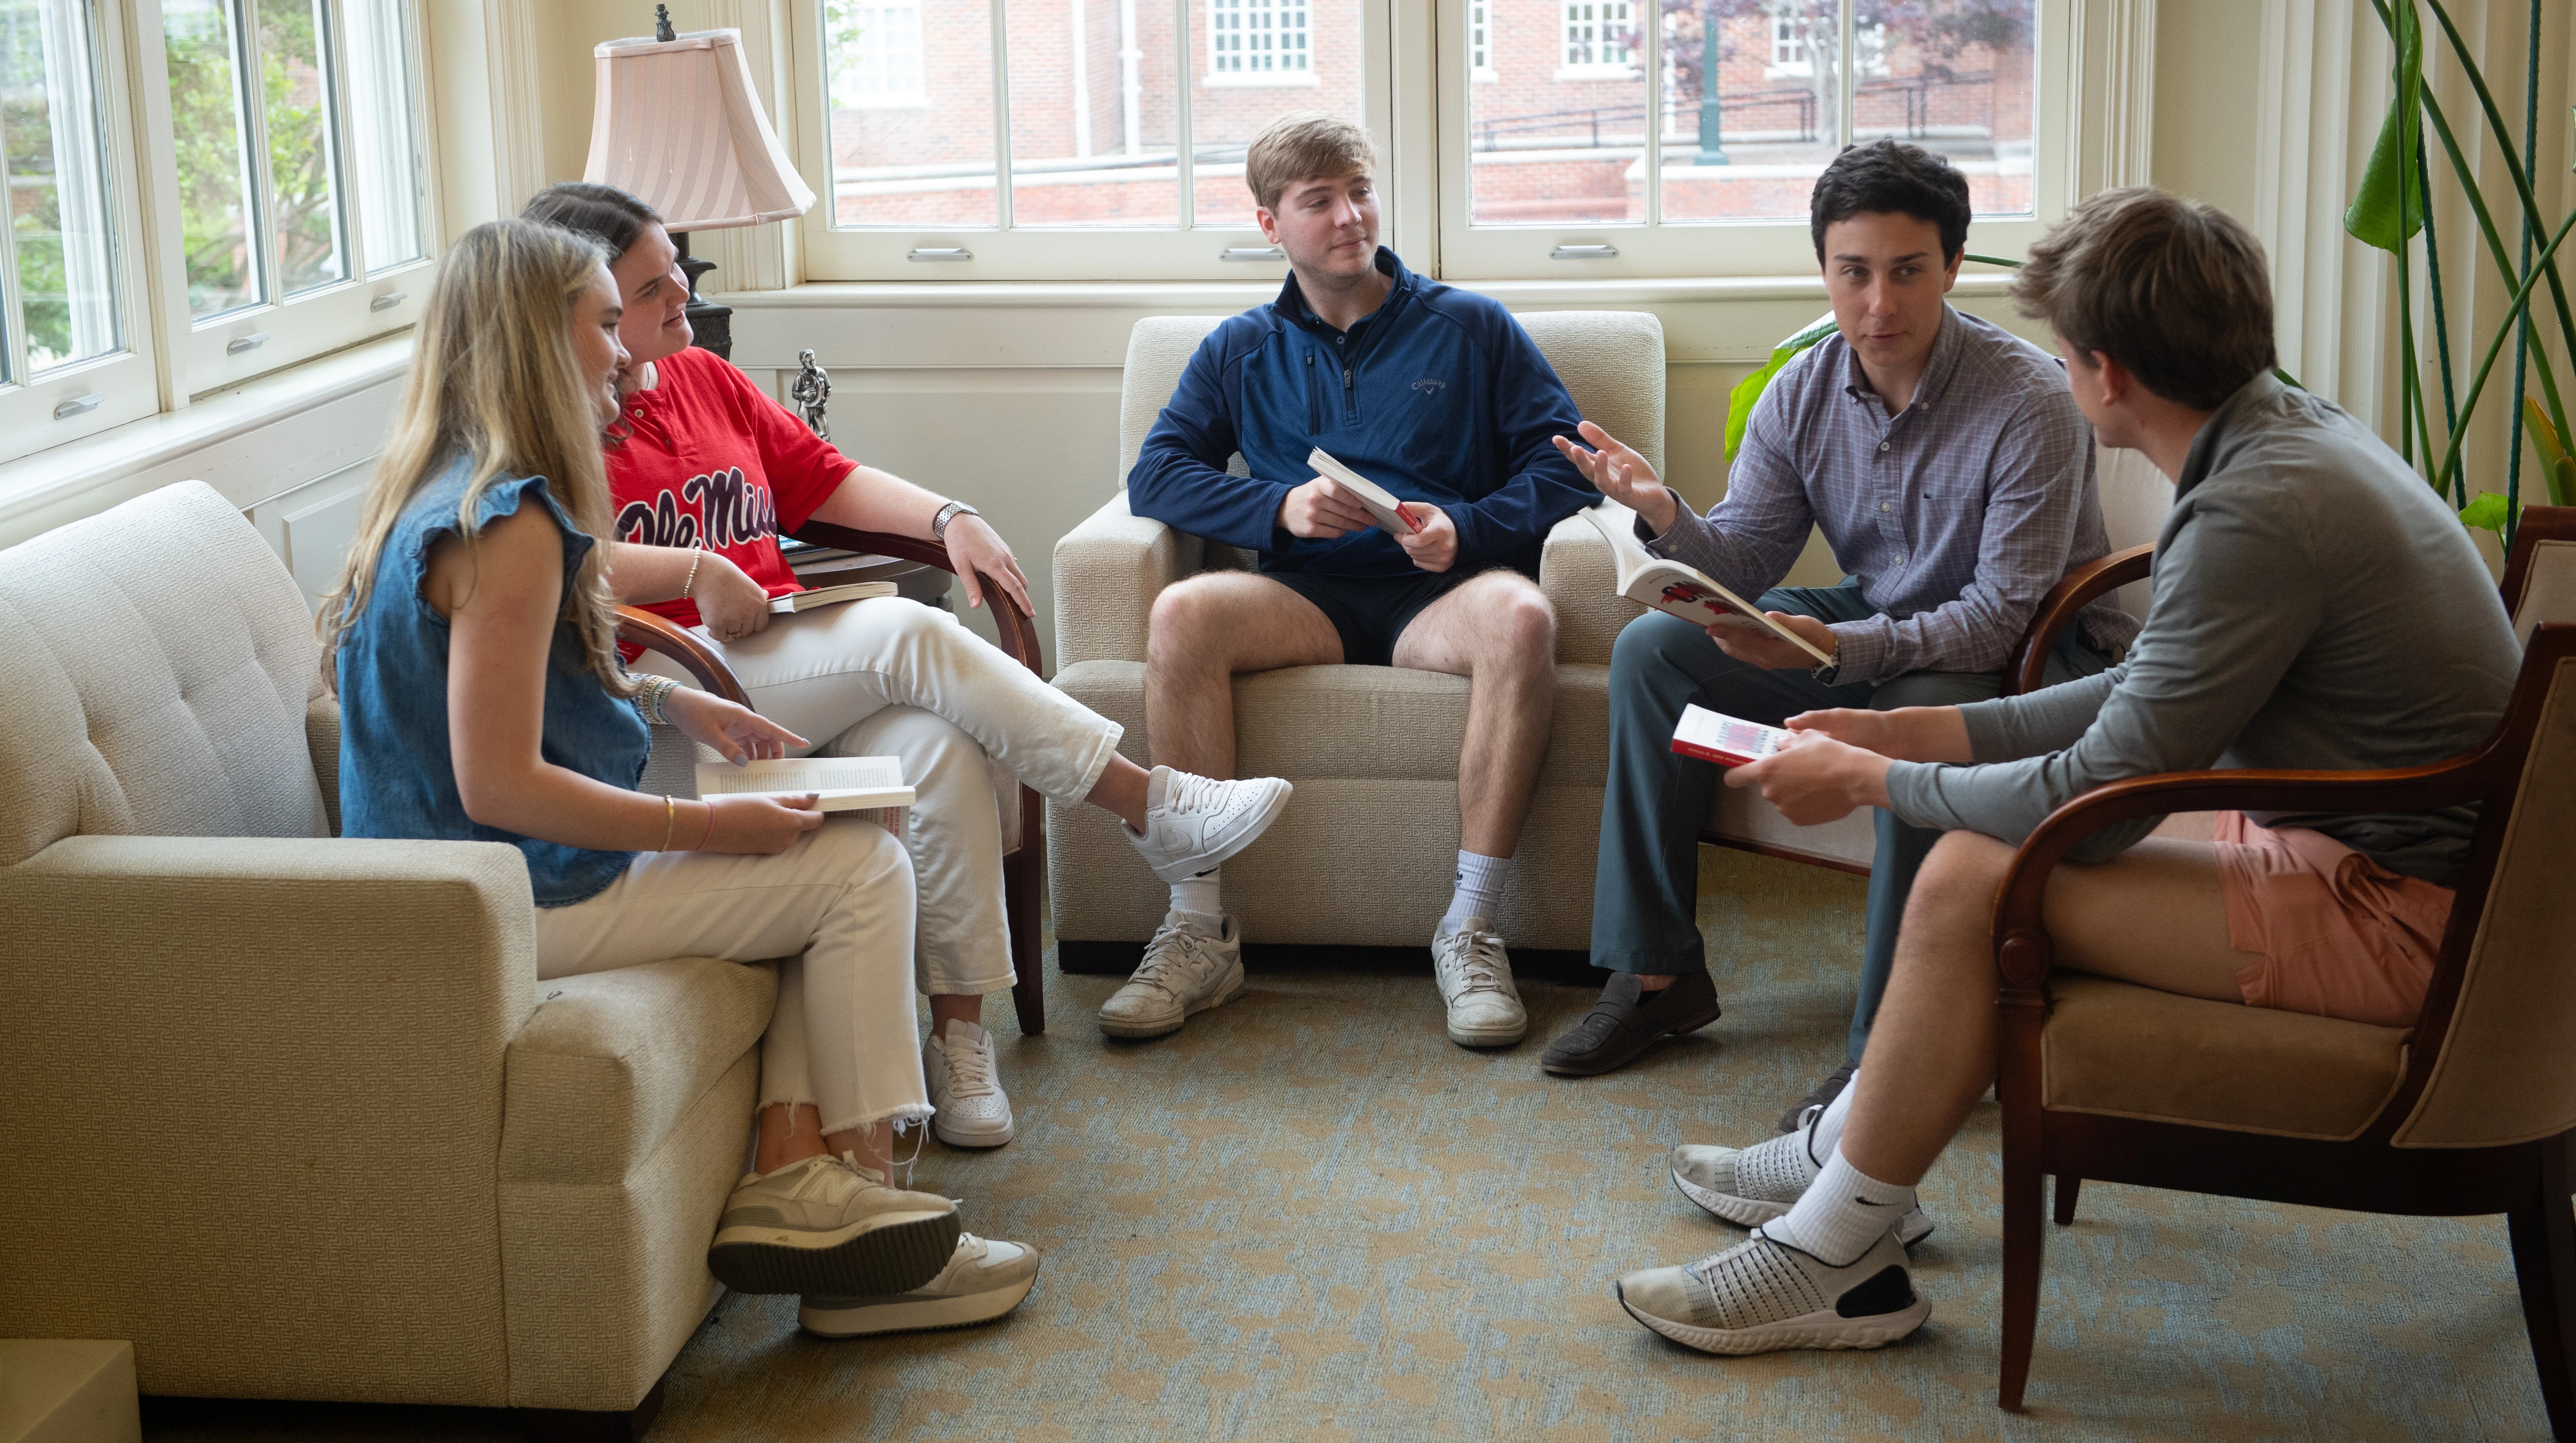 Five students discussing a lecture